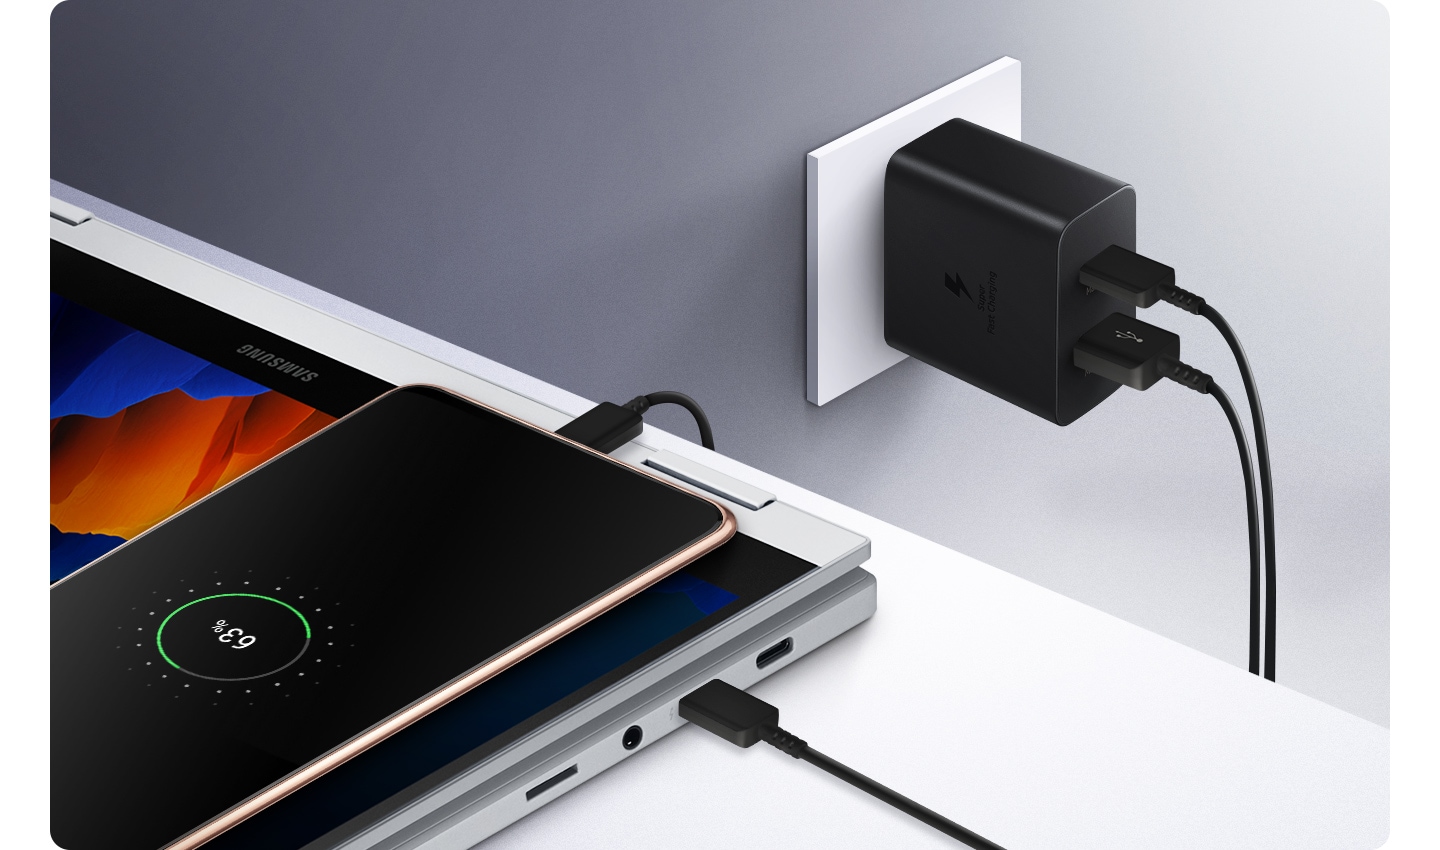 Power Adapter Duo is plugged into the wall outlet to charge both a smartphone and a laptop at the same time.